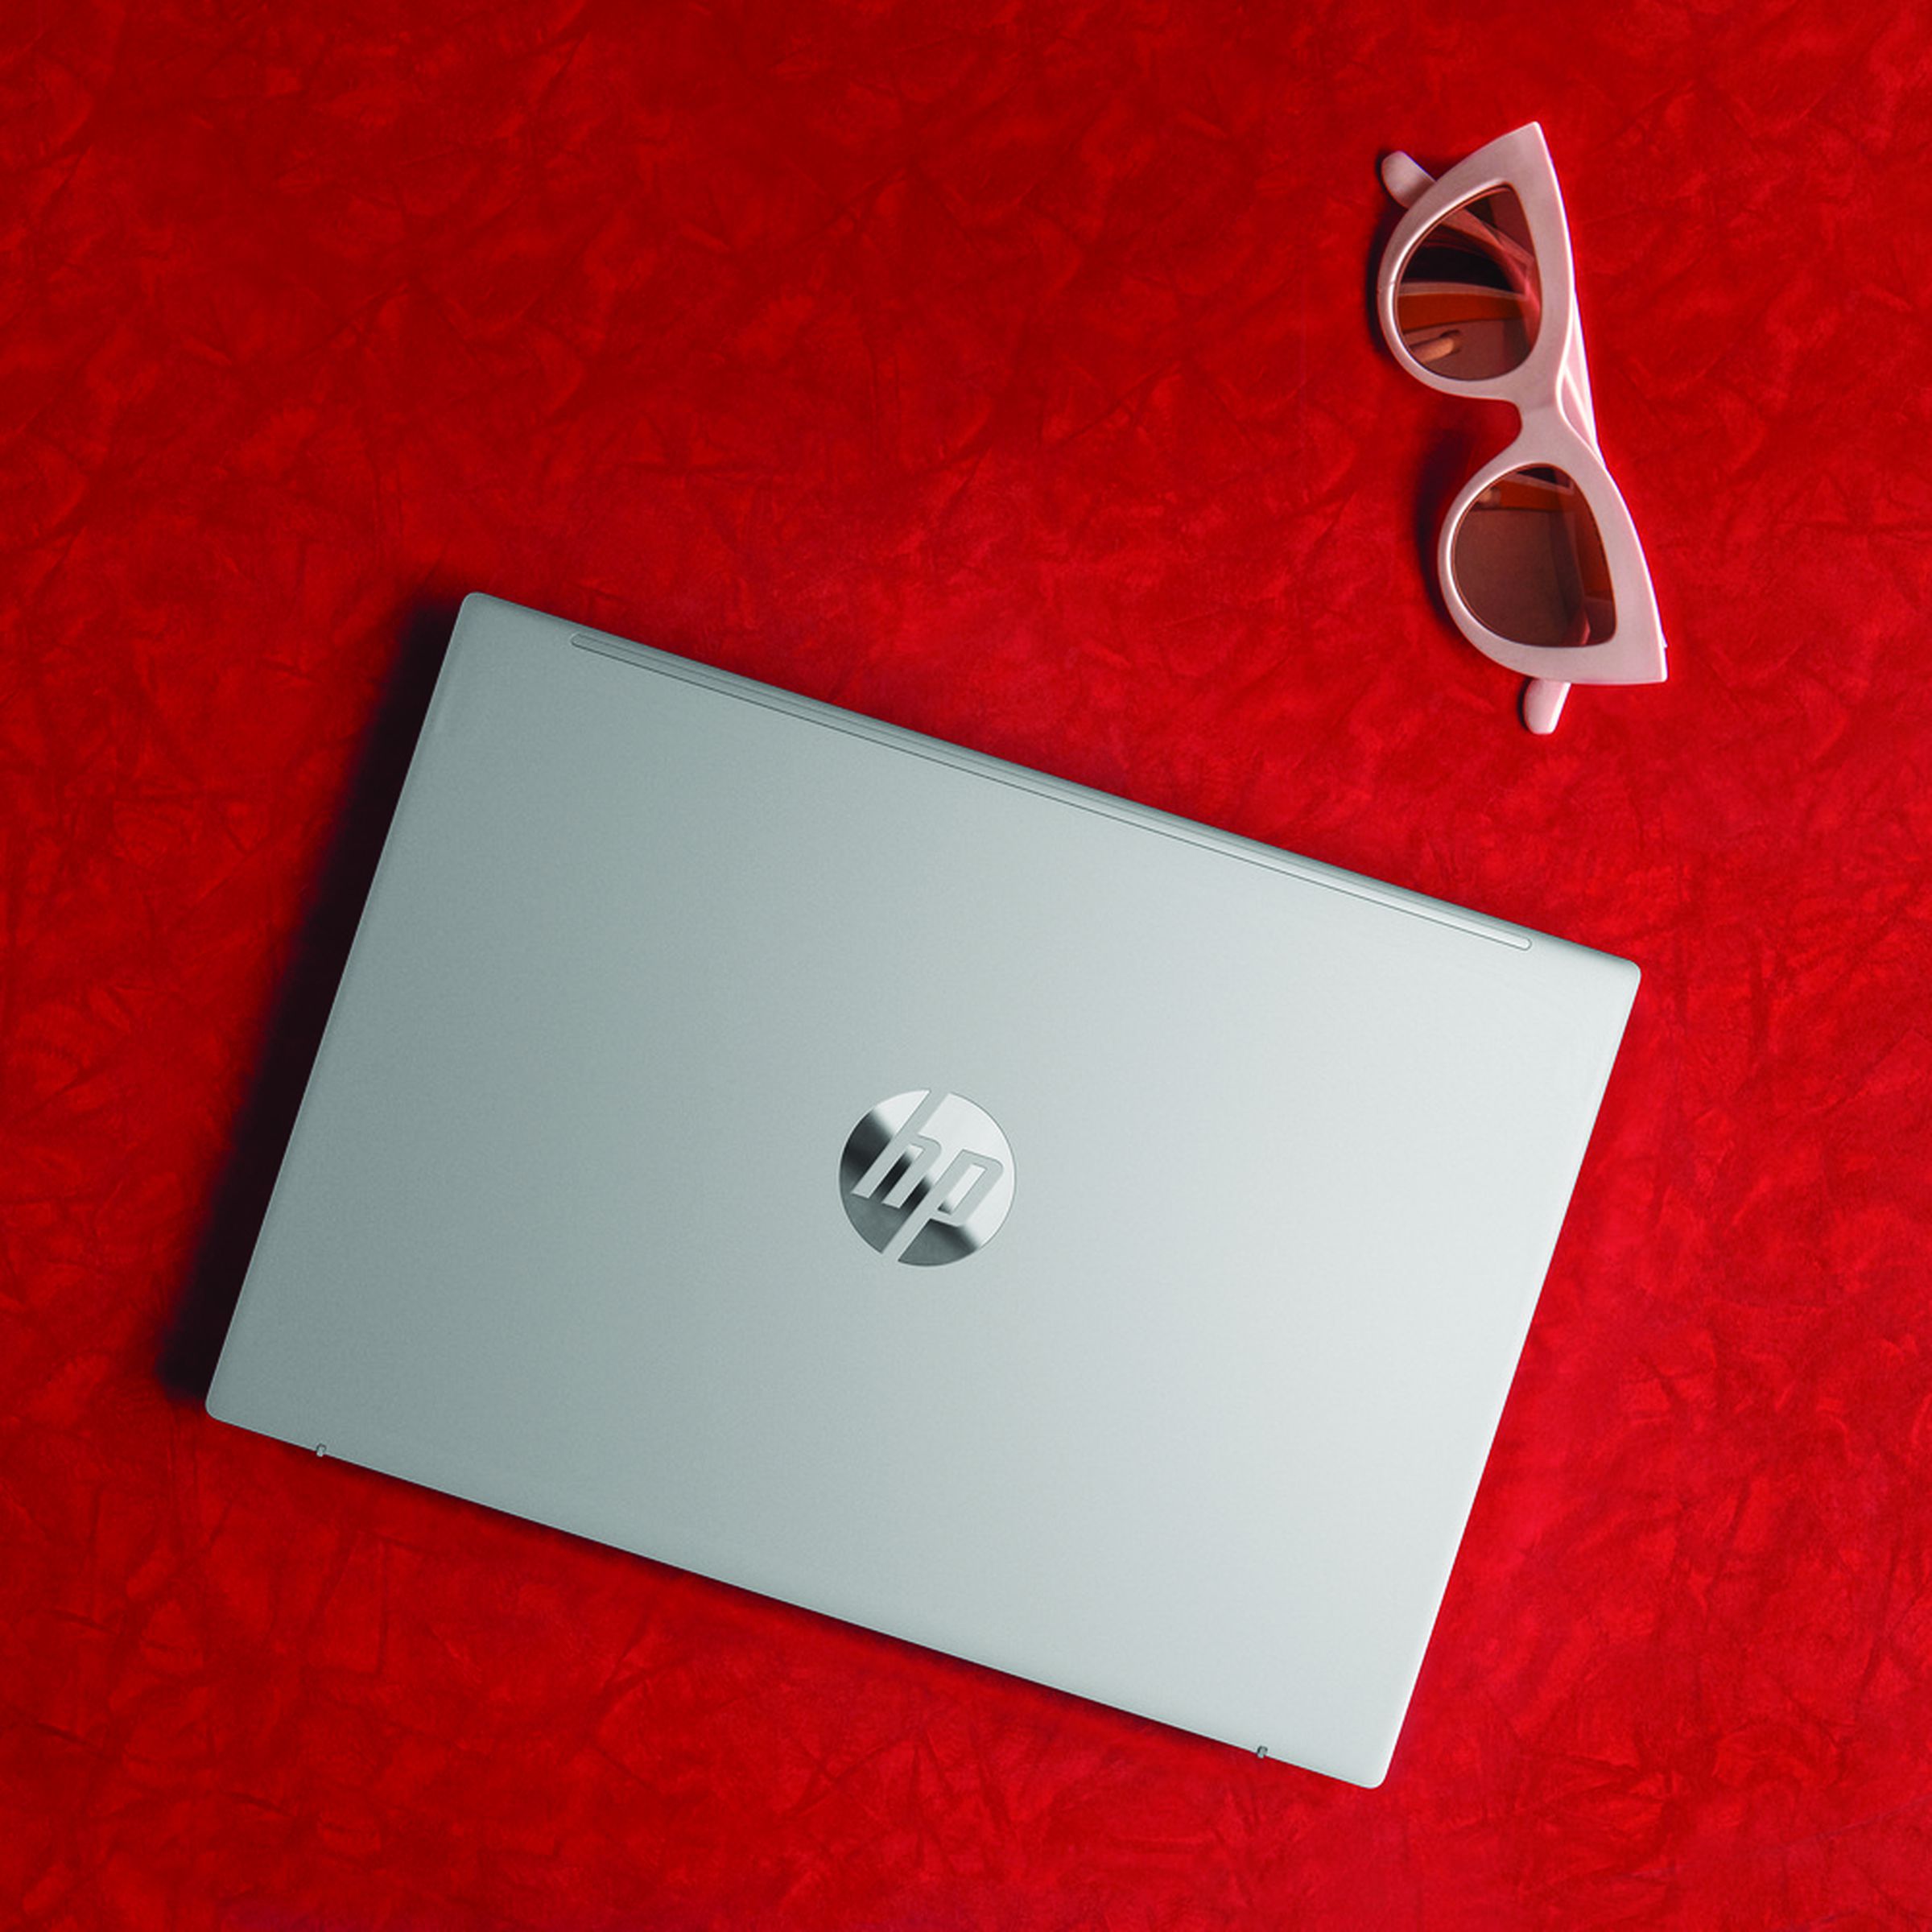 The HP Pavilion Aero 13 closed on a red background. To the right is a pair of pink sunglasses.